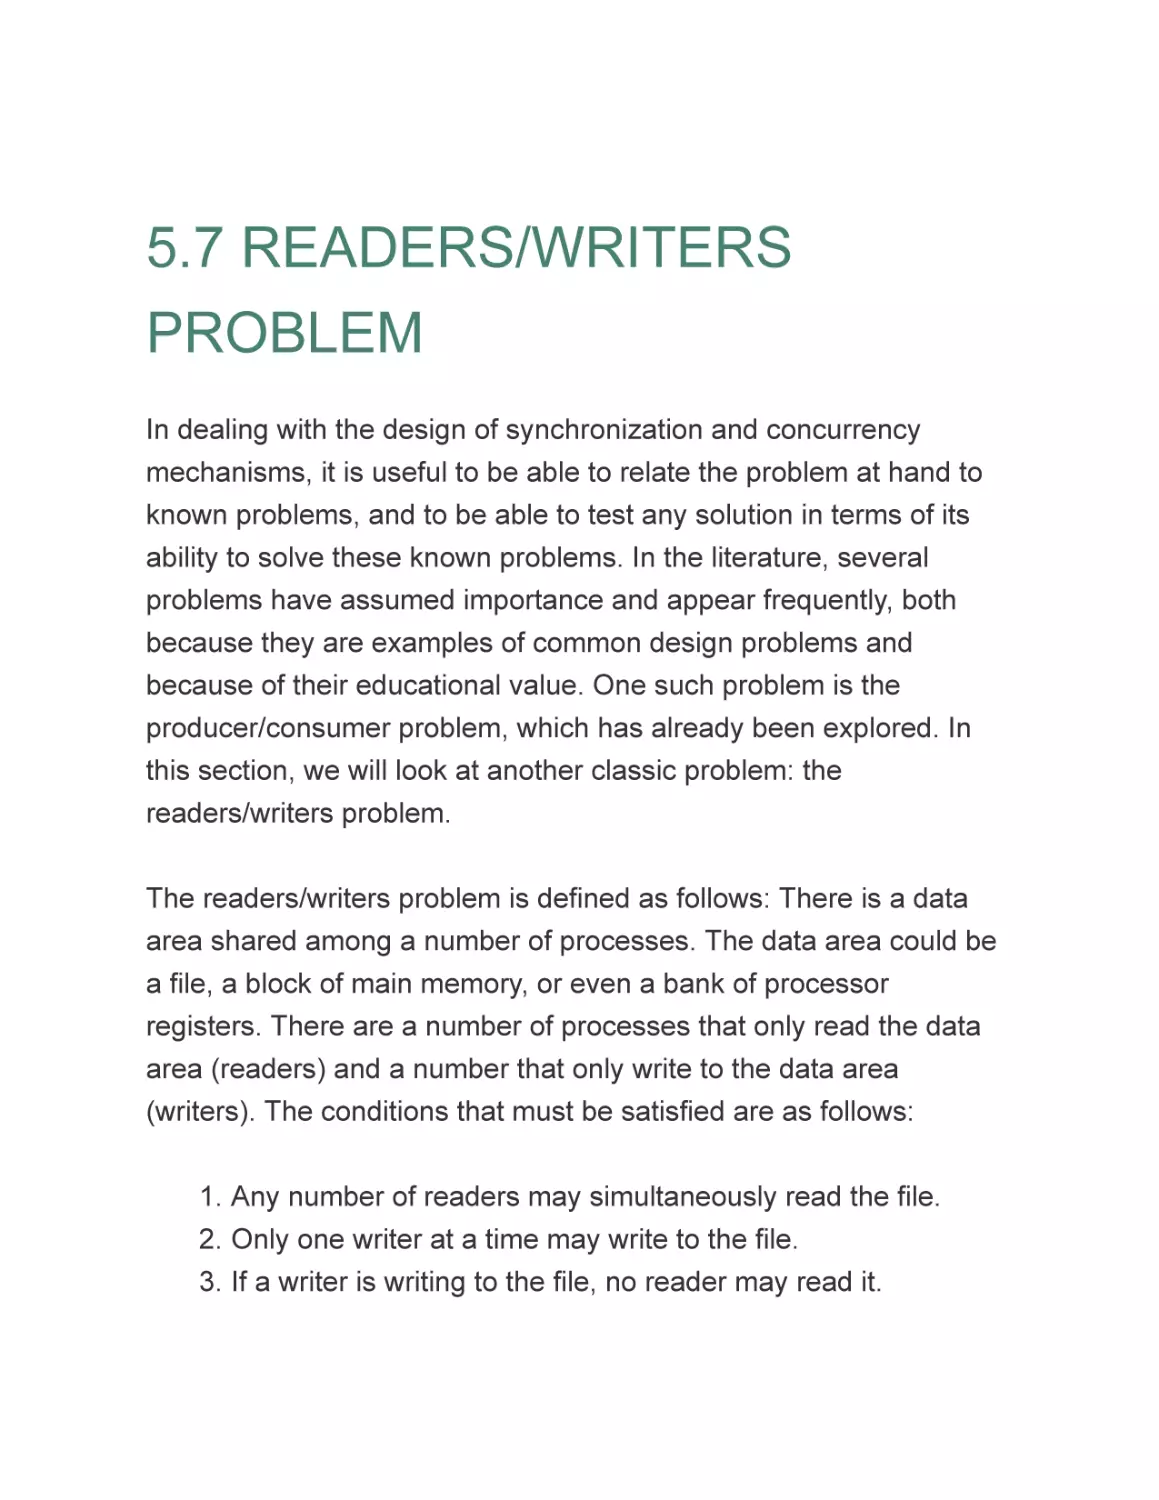 5.7 READERS/WRITERS PROBLEM